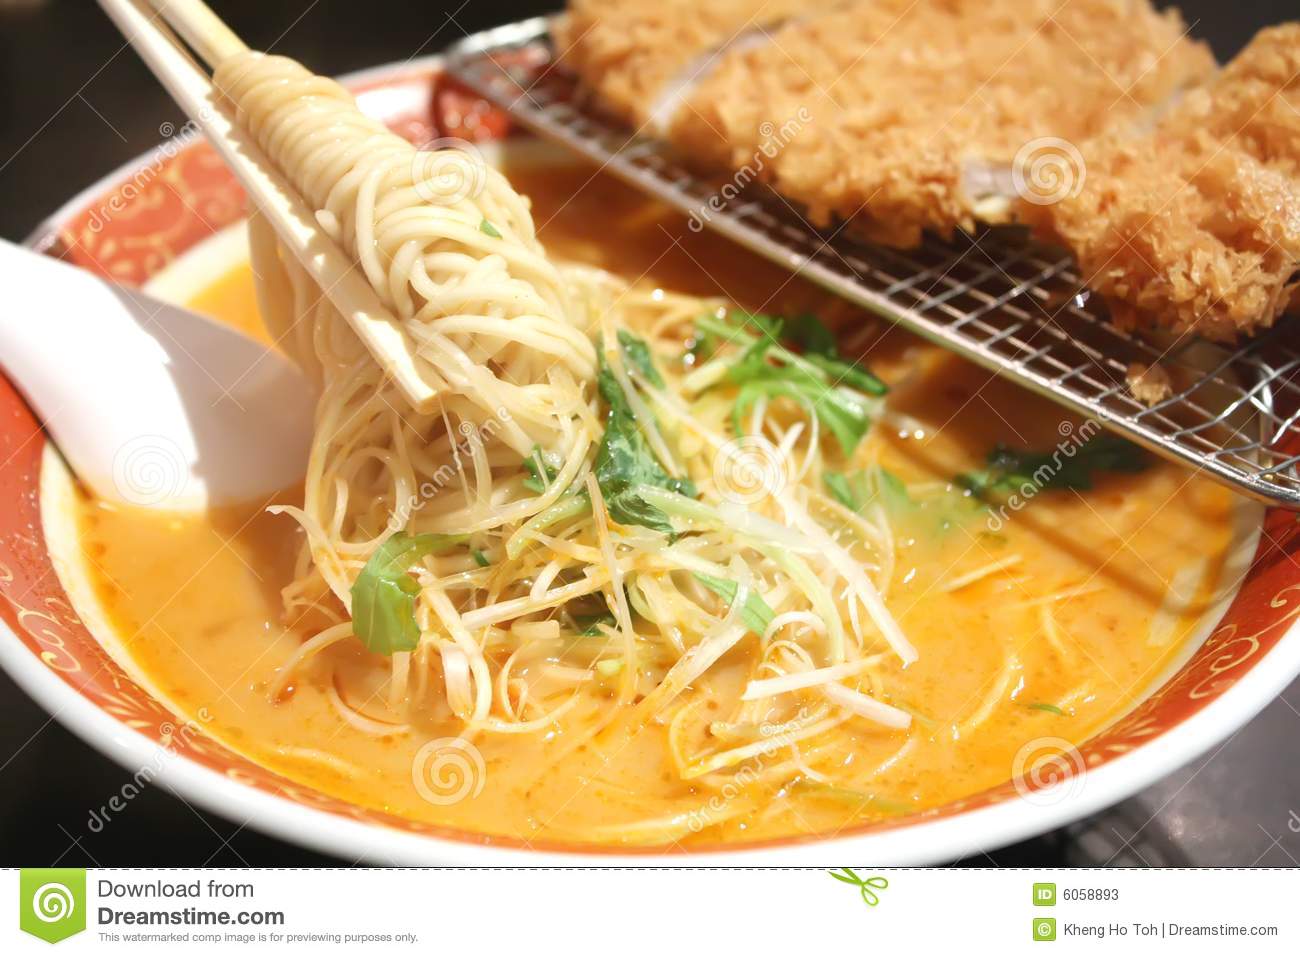 Ramen Noodles With Steaming Hot Soup Stock Photos   Image  6058893